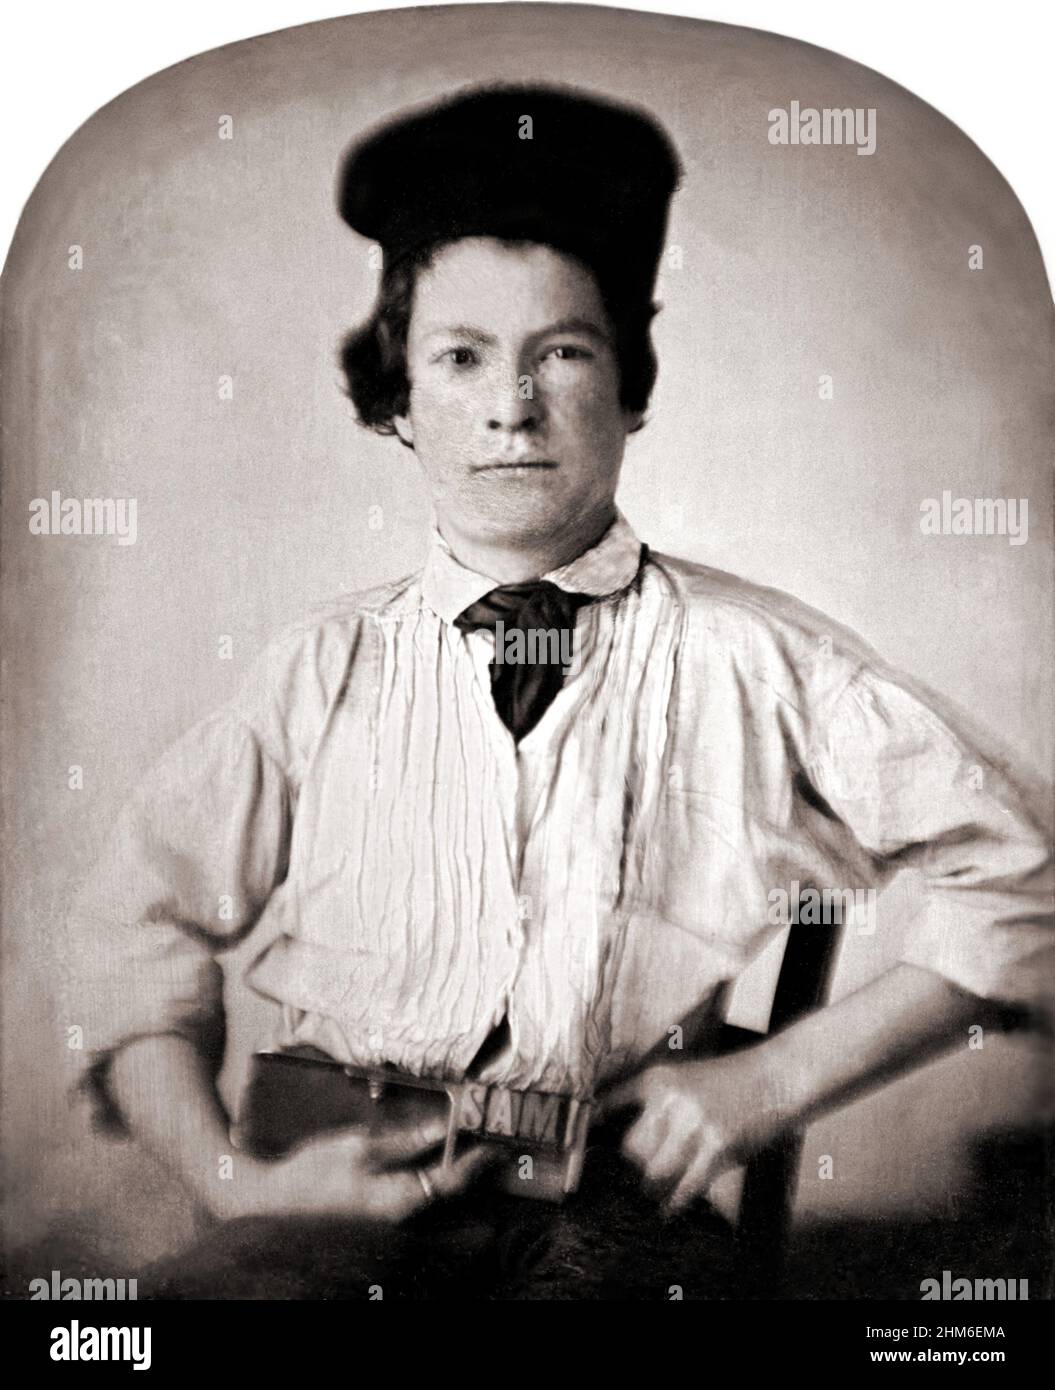 The american writer Mark Twain (real name Samuel Clemens), author of Tom Sawyer and Huckleberry Finn. Photo from 1850 when the author was 15. Stock Photo